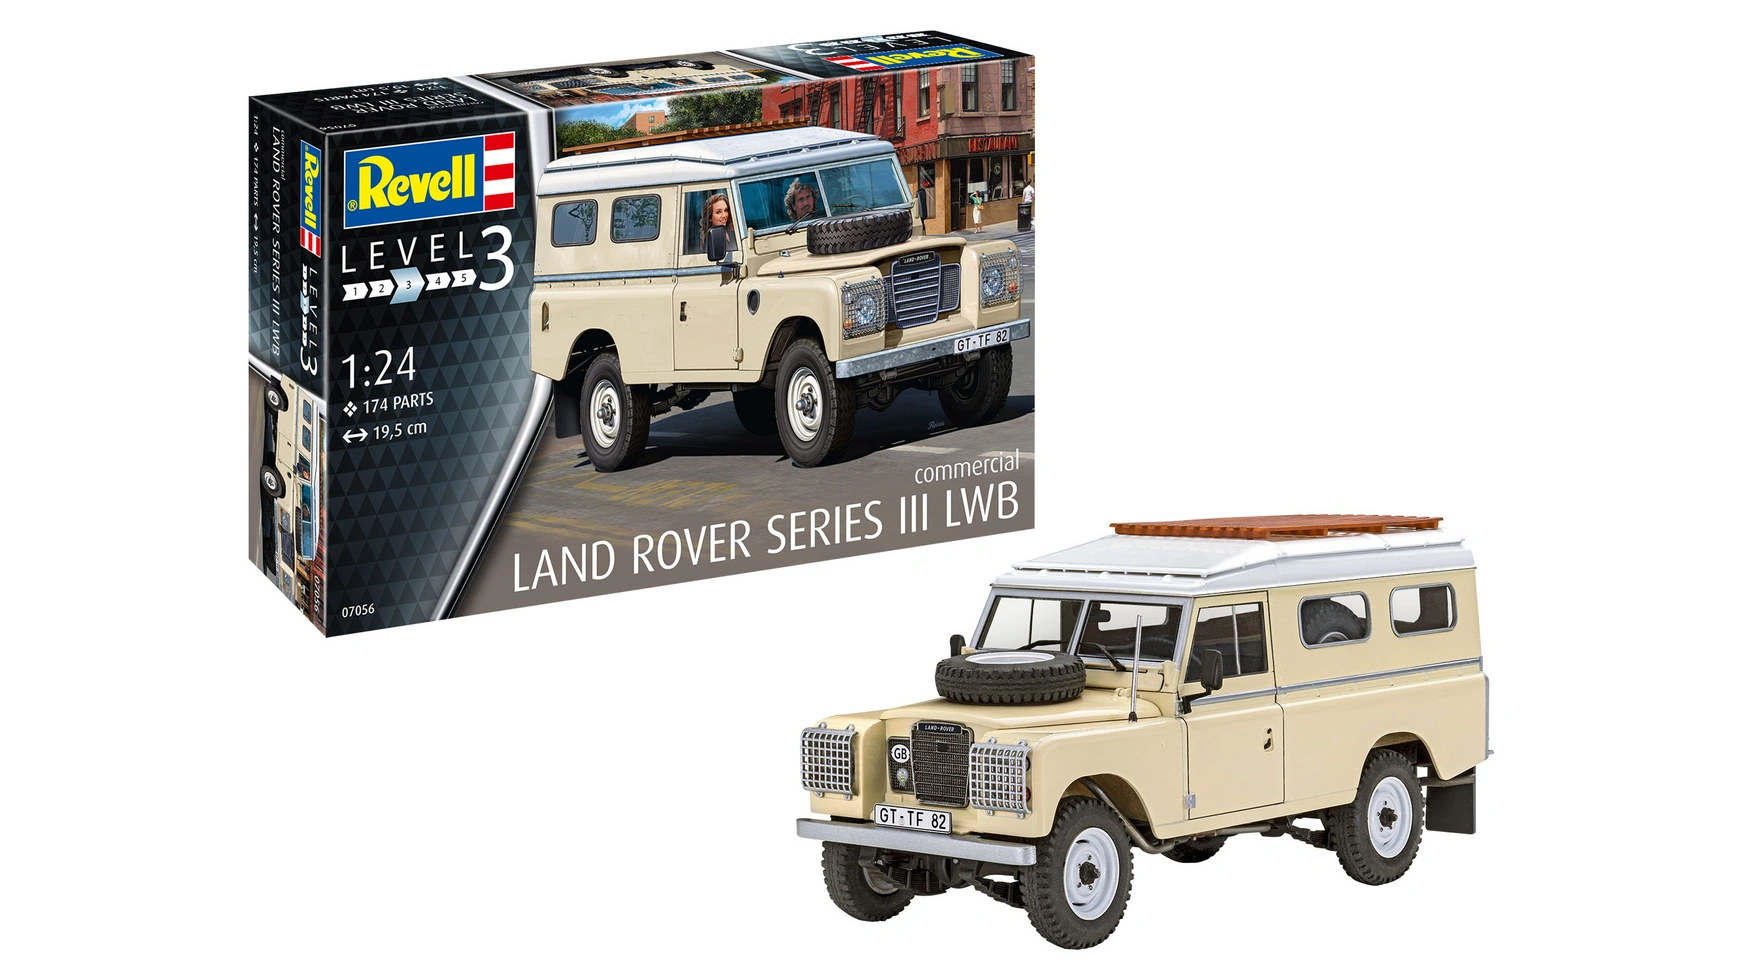 Revell Land Rover Series III LWB (коммерческий) welly 1 24 land rover discovery 4 white alloy car model diecasts